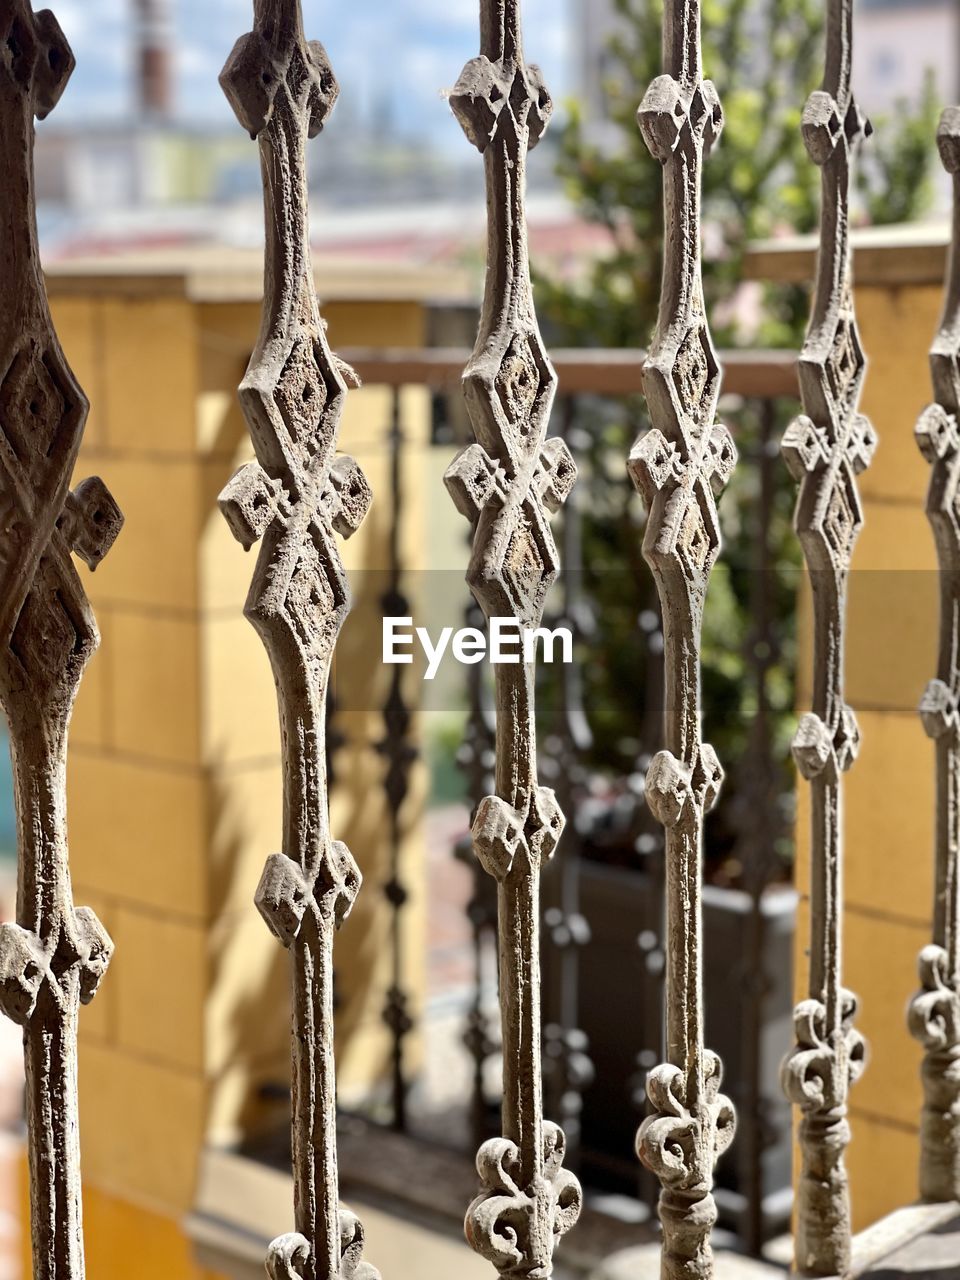 iron, metal, no people, architecture, pattern, close-up, fence, focus on foreground, gate, lighting, building, built structure, day, ornate, hanging, outdoors